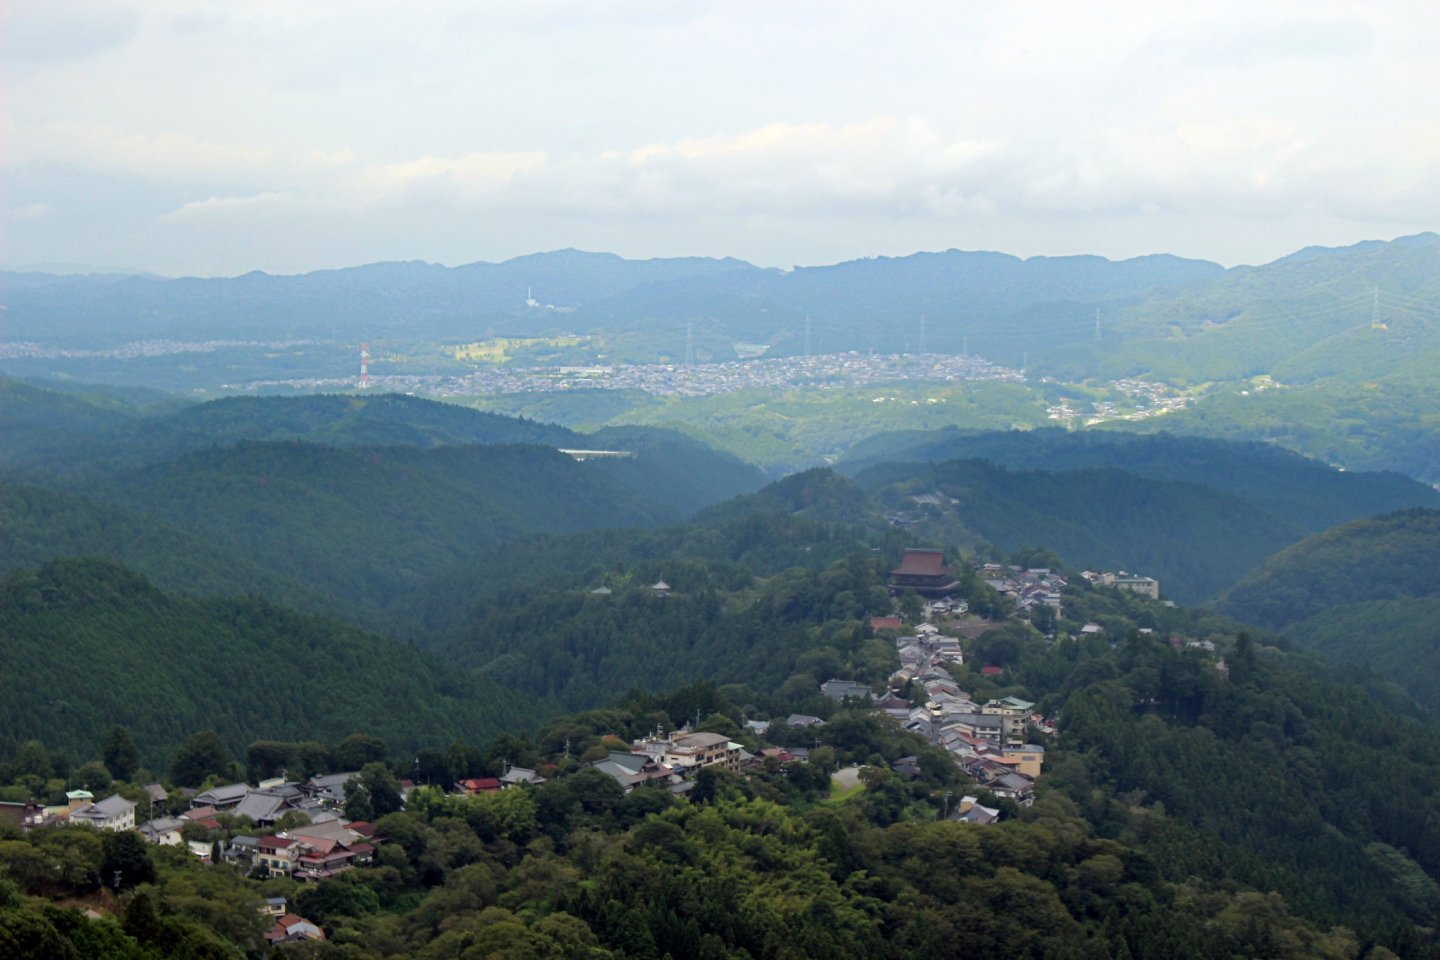 Kinpusenji Temple towers over all of the Town of Yoshinoyama and appears to stop the towns down hill flow against the backdrop of Oyodo Town and the other mountains of Nara